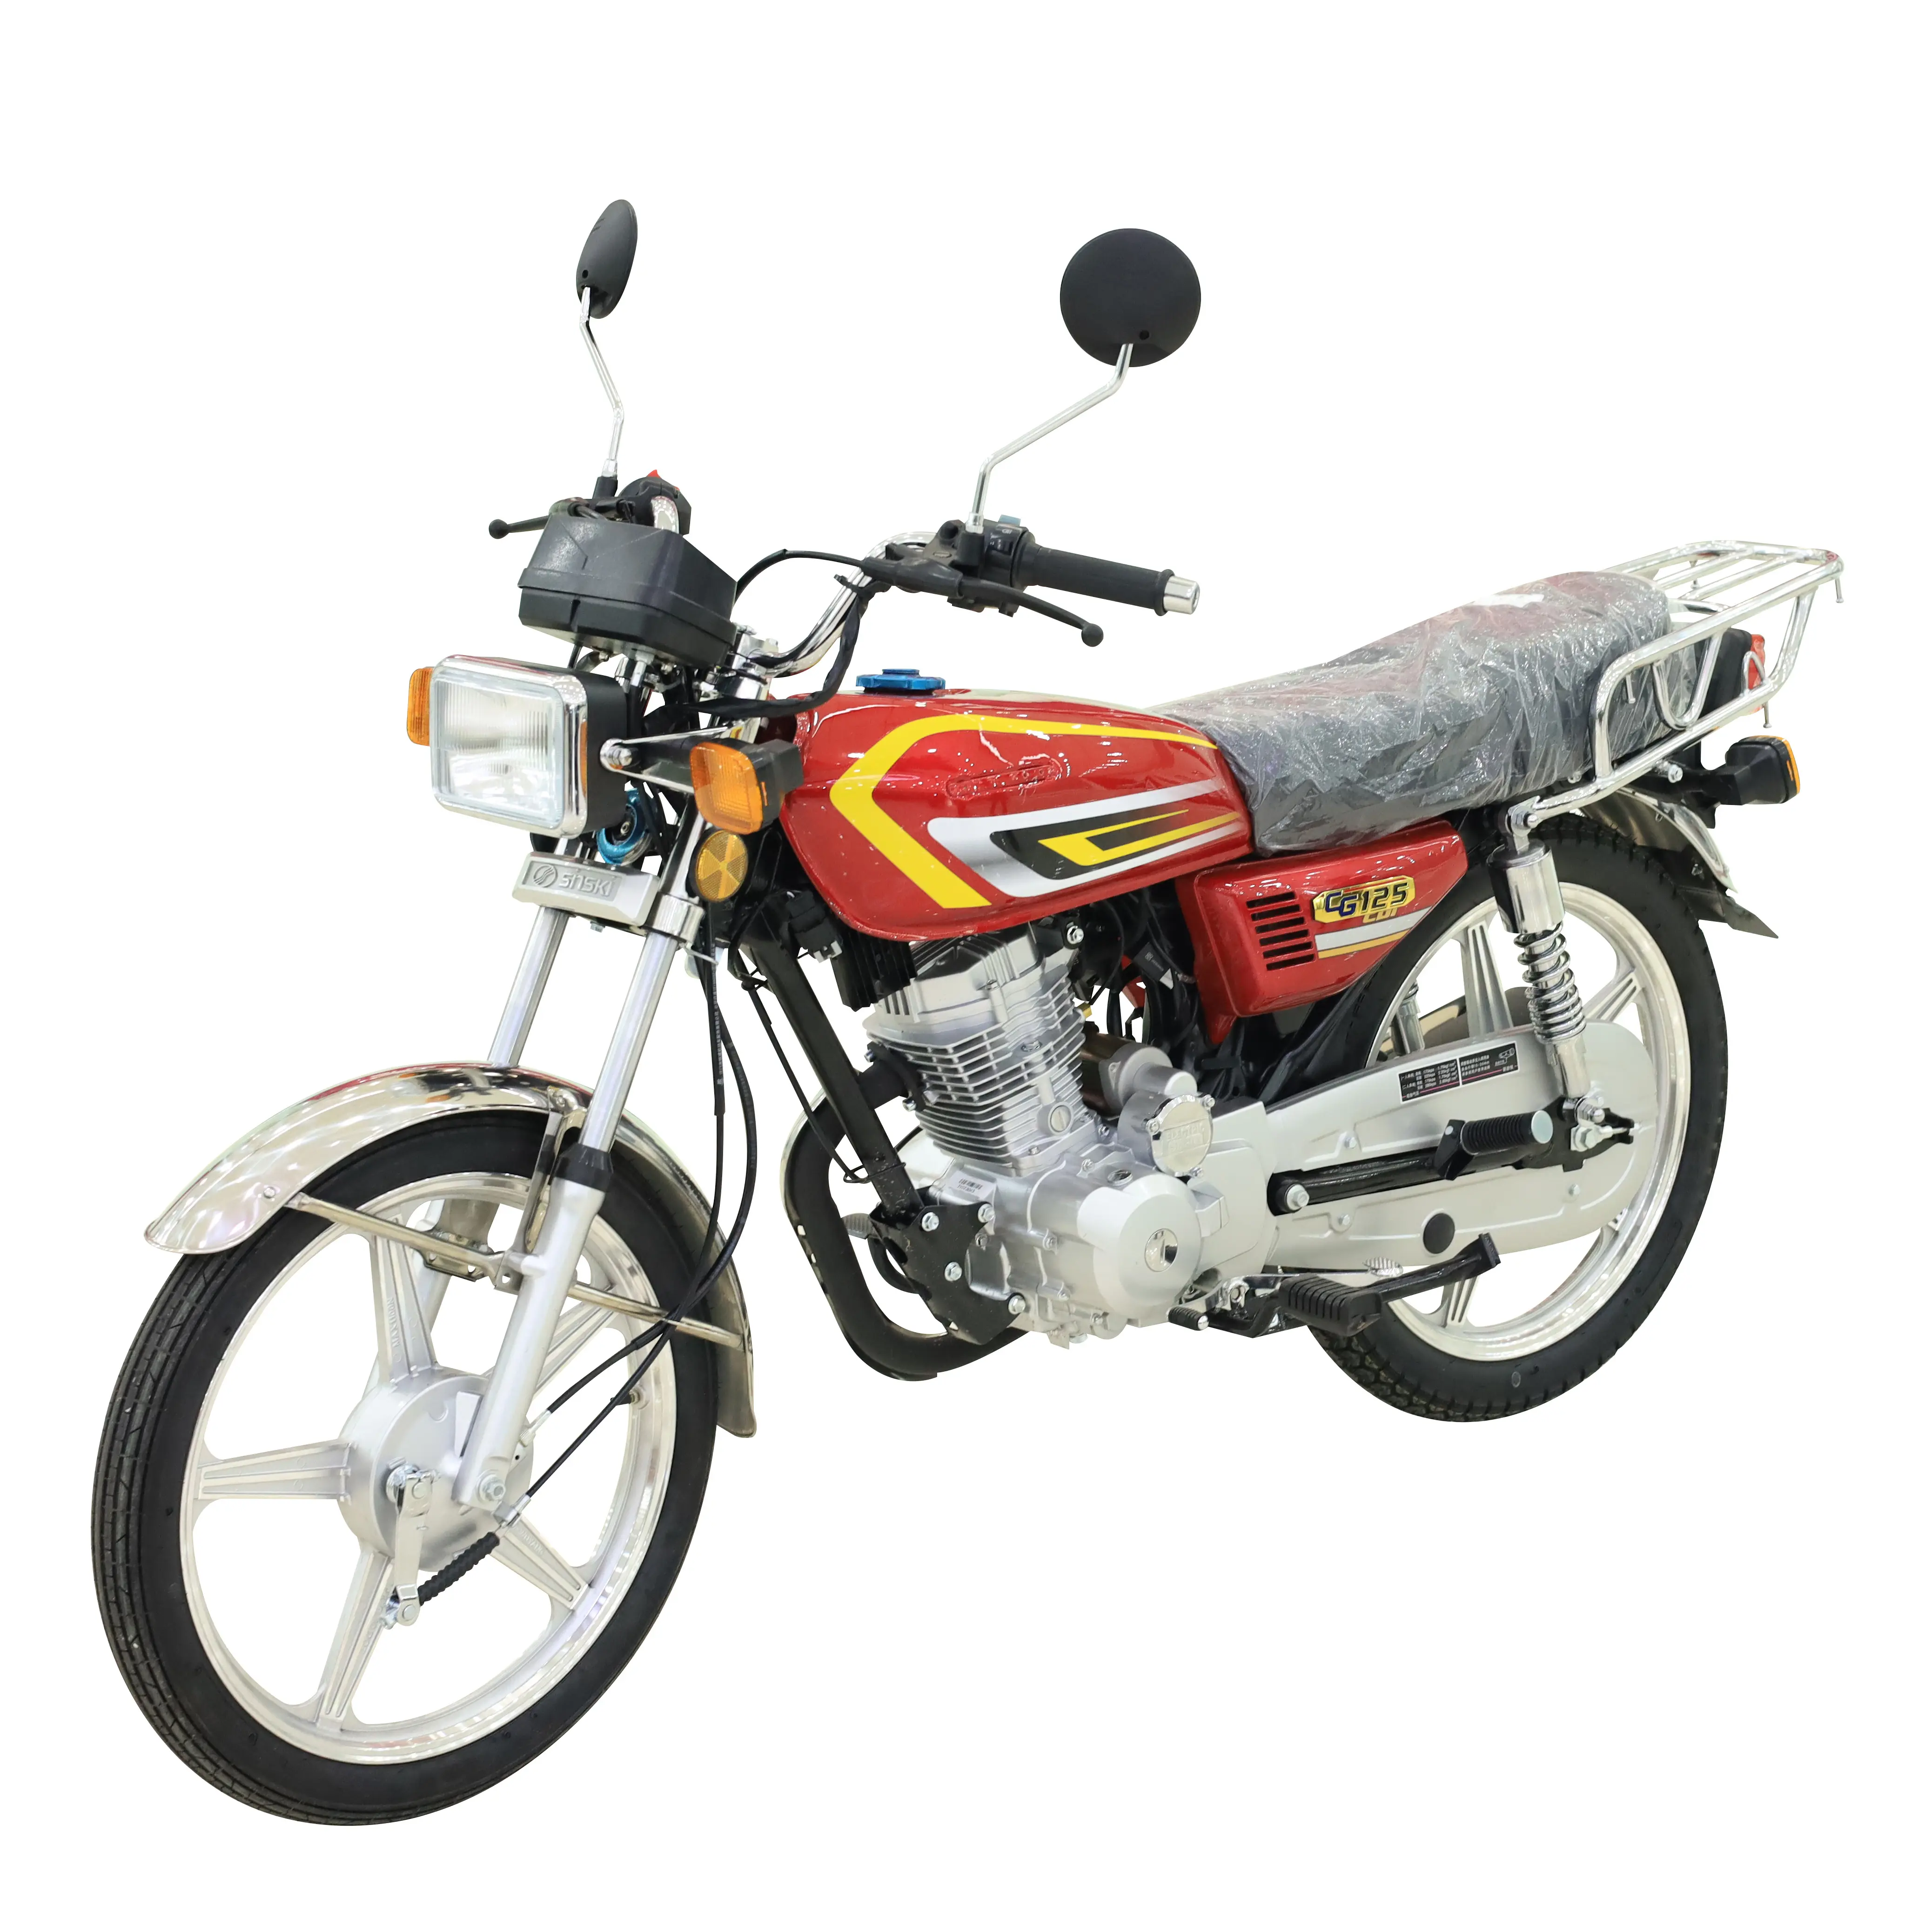 Cheap popular 125cc gas motorbike off road motorcycle high quality gasoline motorcycle for adult